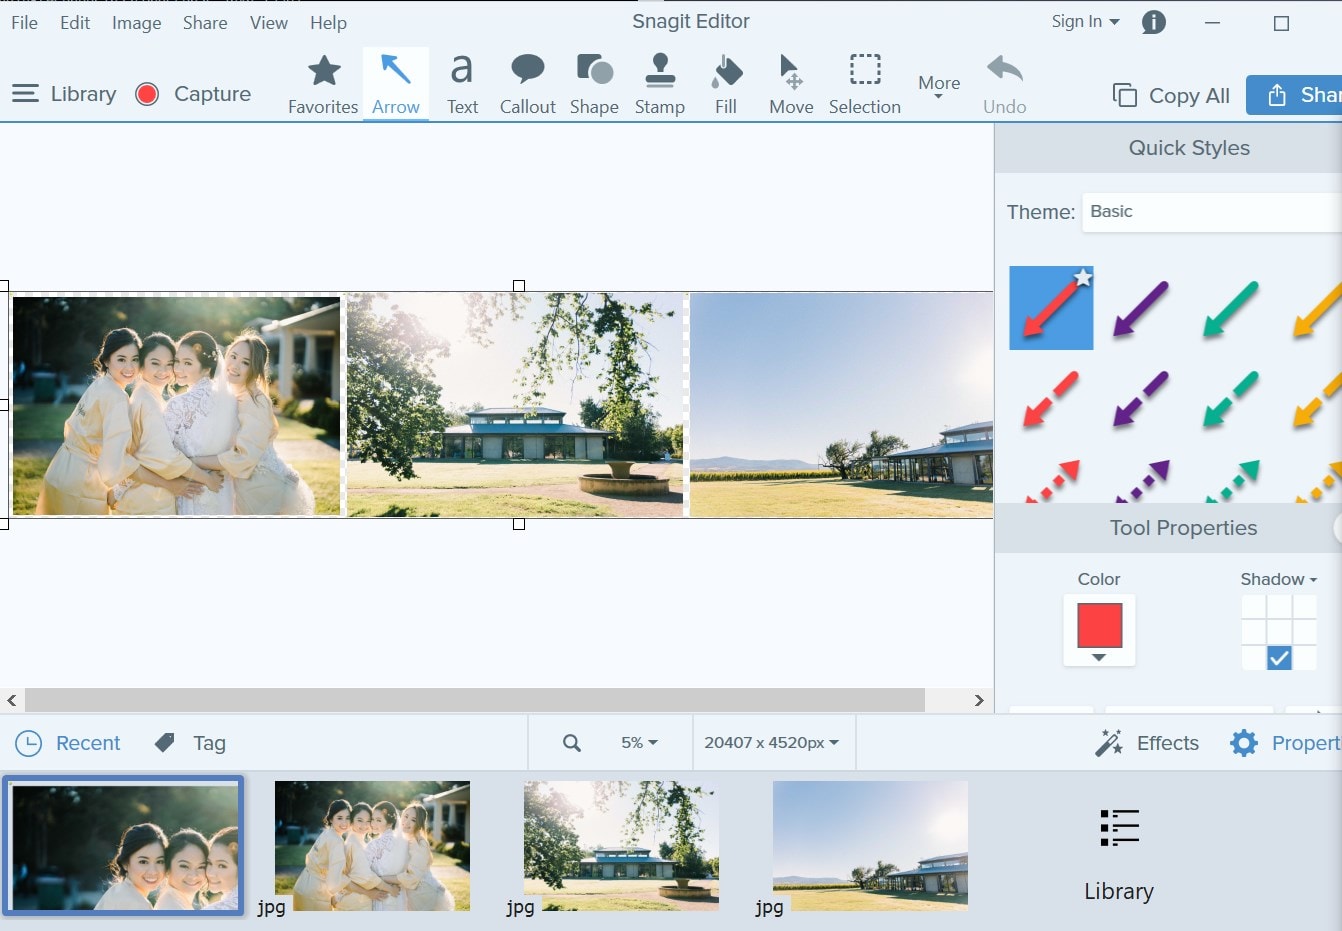 A step upgrade from Snagit 2018 - Snagit 2019 Review